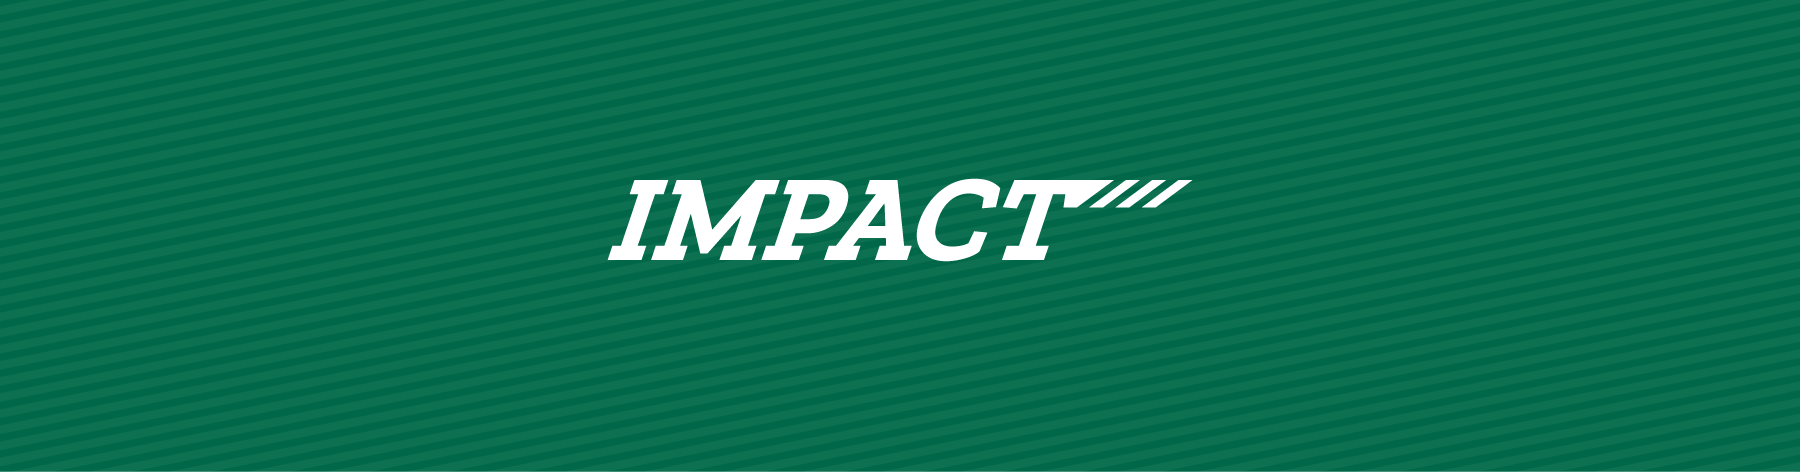 IMPACT - Presidents Annual Report 2017 - 2018